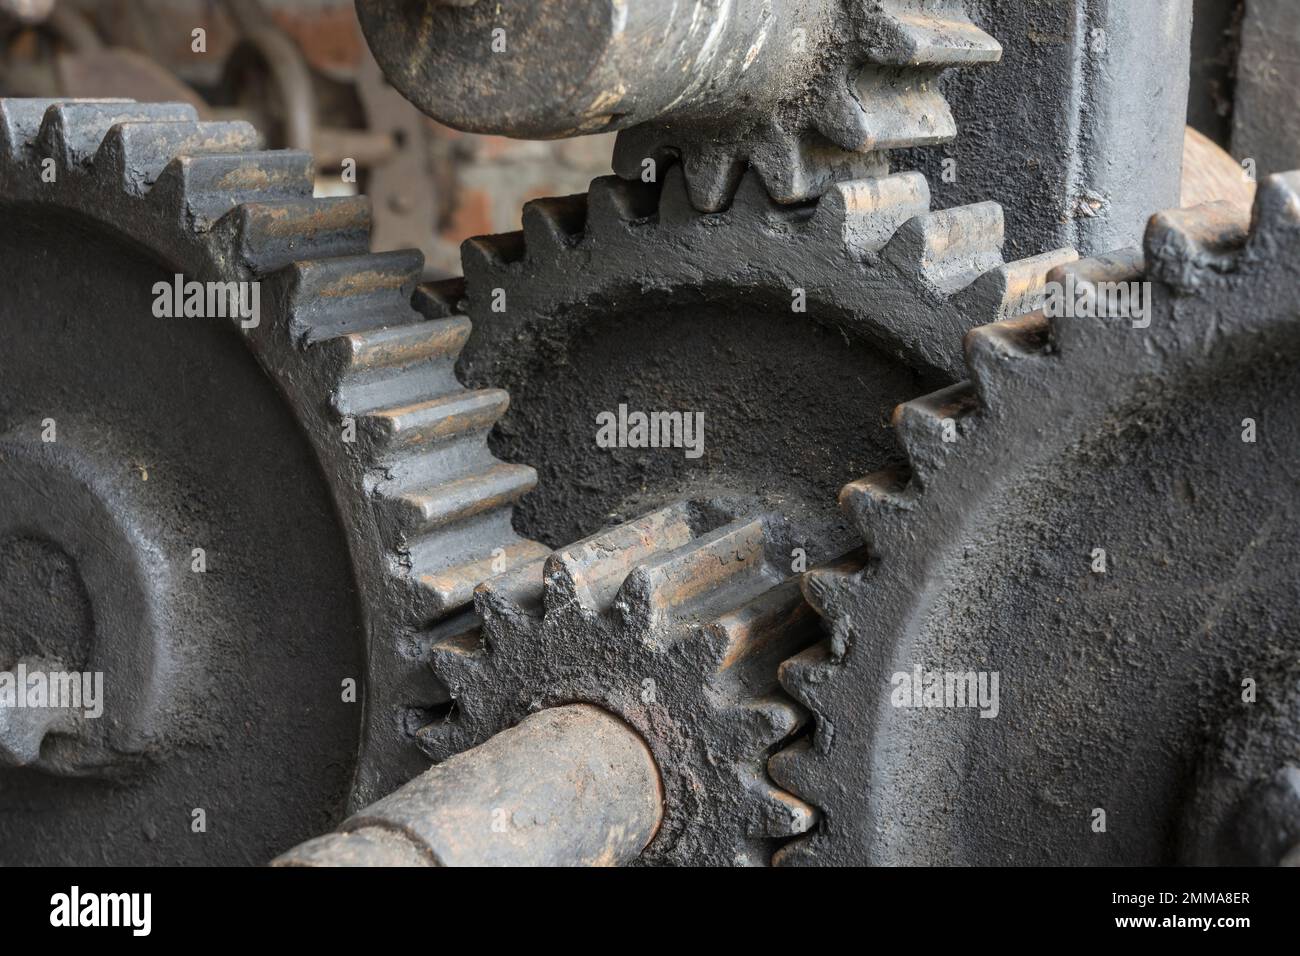 gears of a historic machine Stock Photo